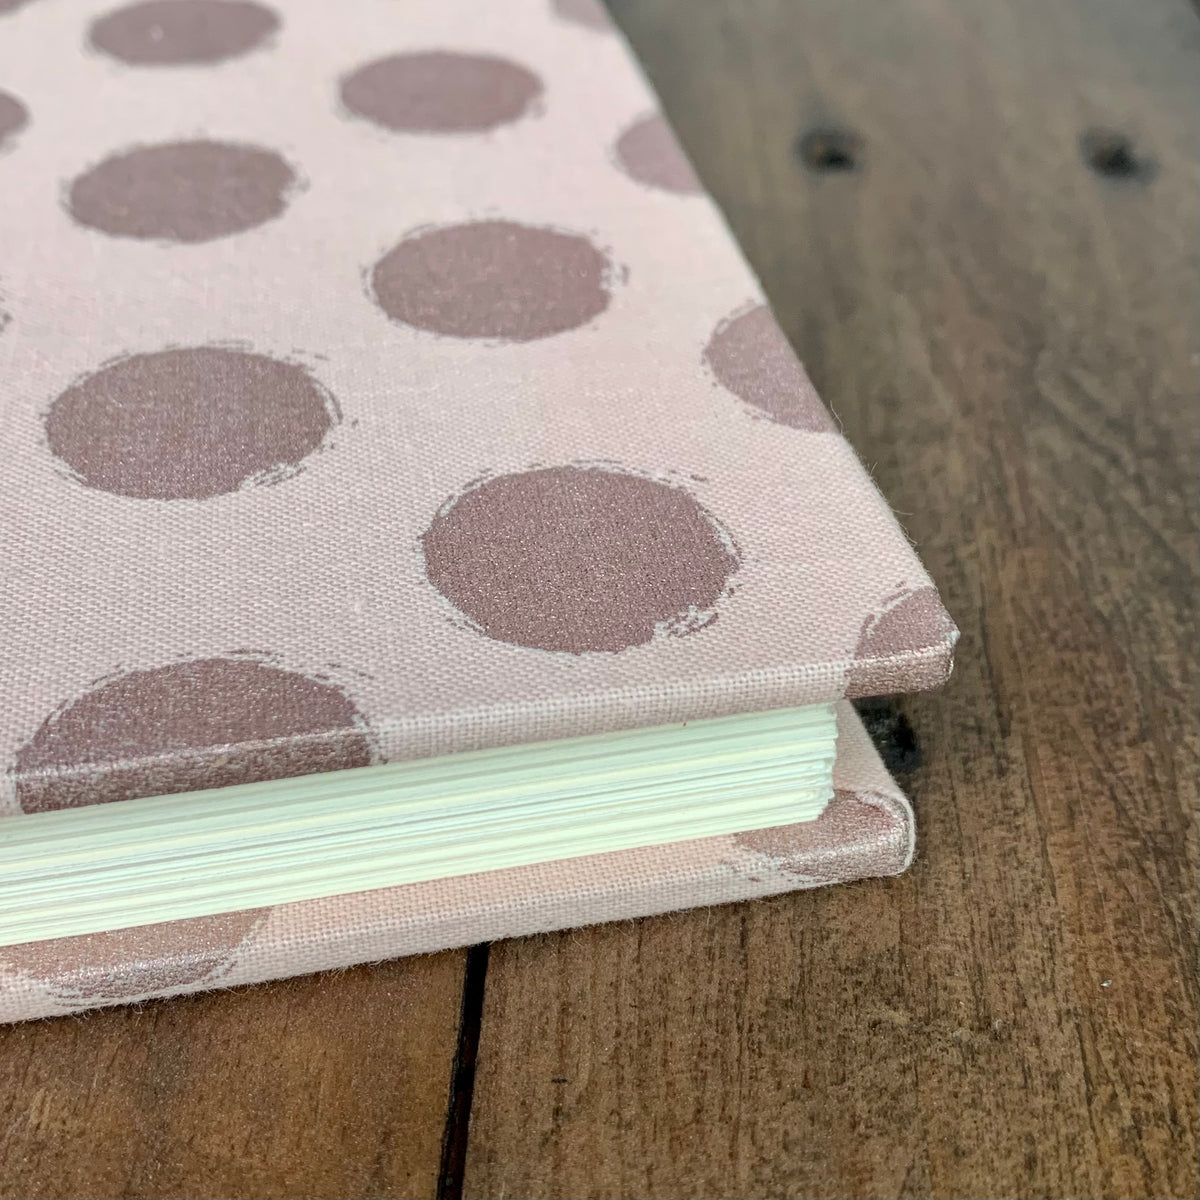 Fabric Covered Journal | Metallic Pink Dots